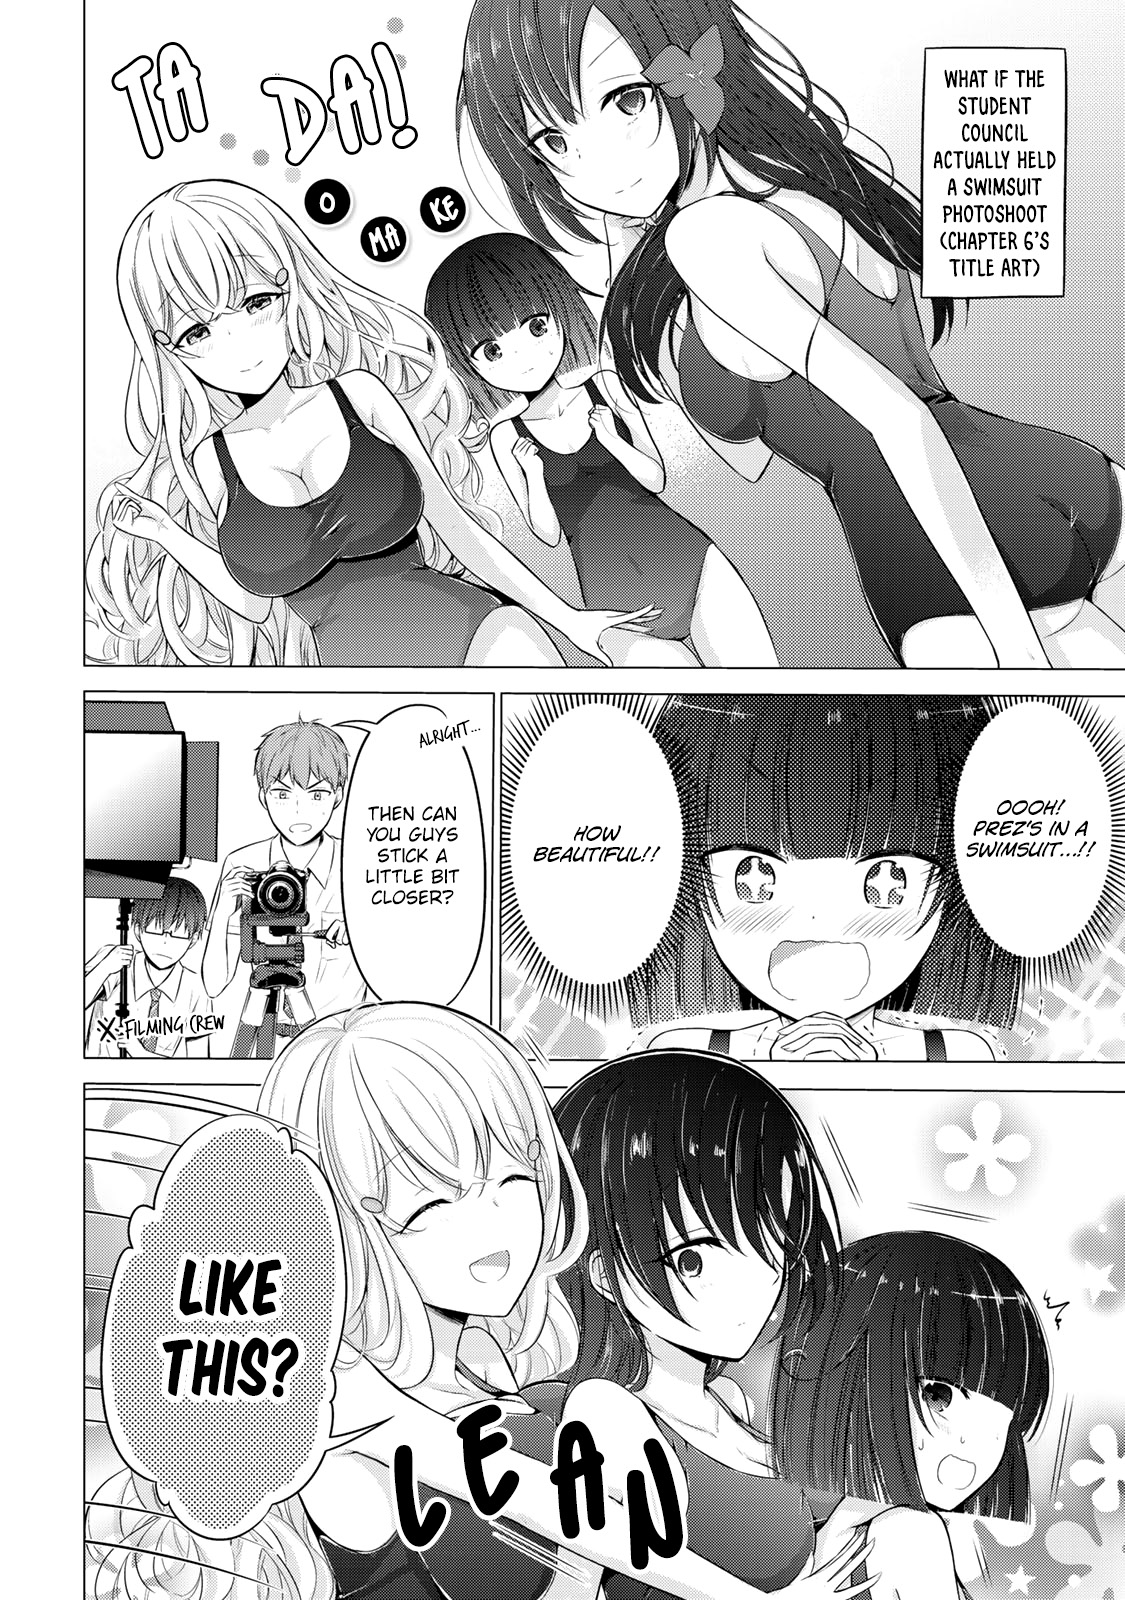 The Student Council President Solves Everything On The Bed Chapter 8.6 #2